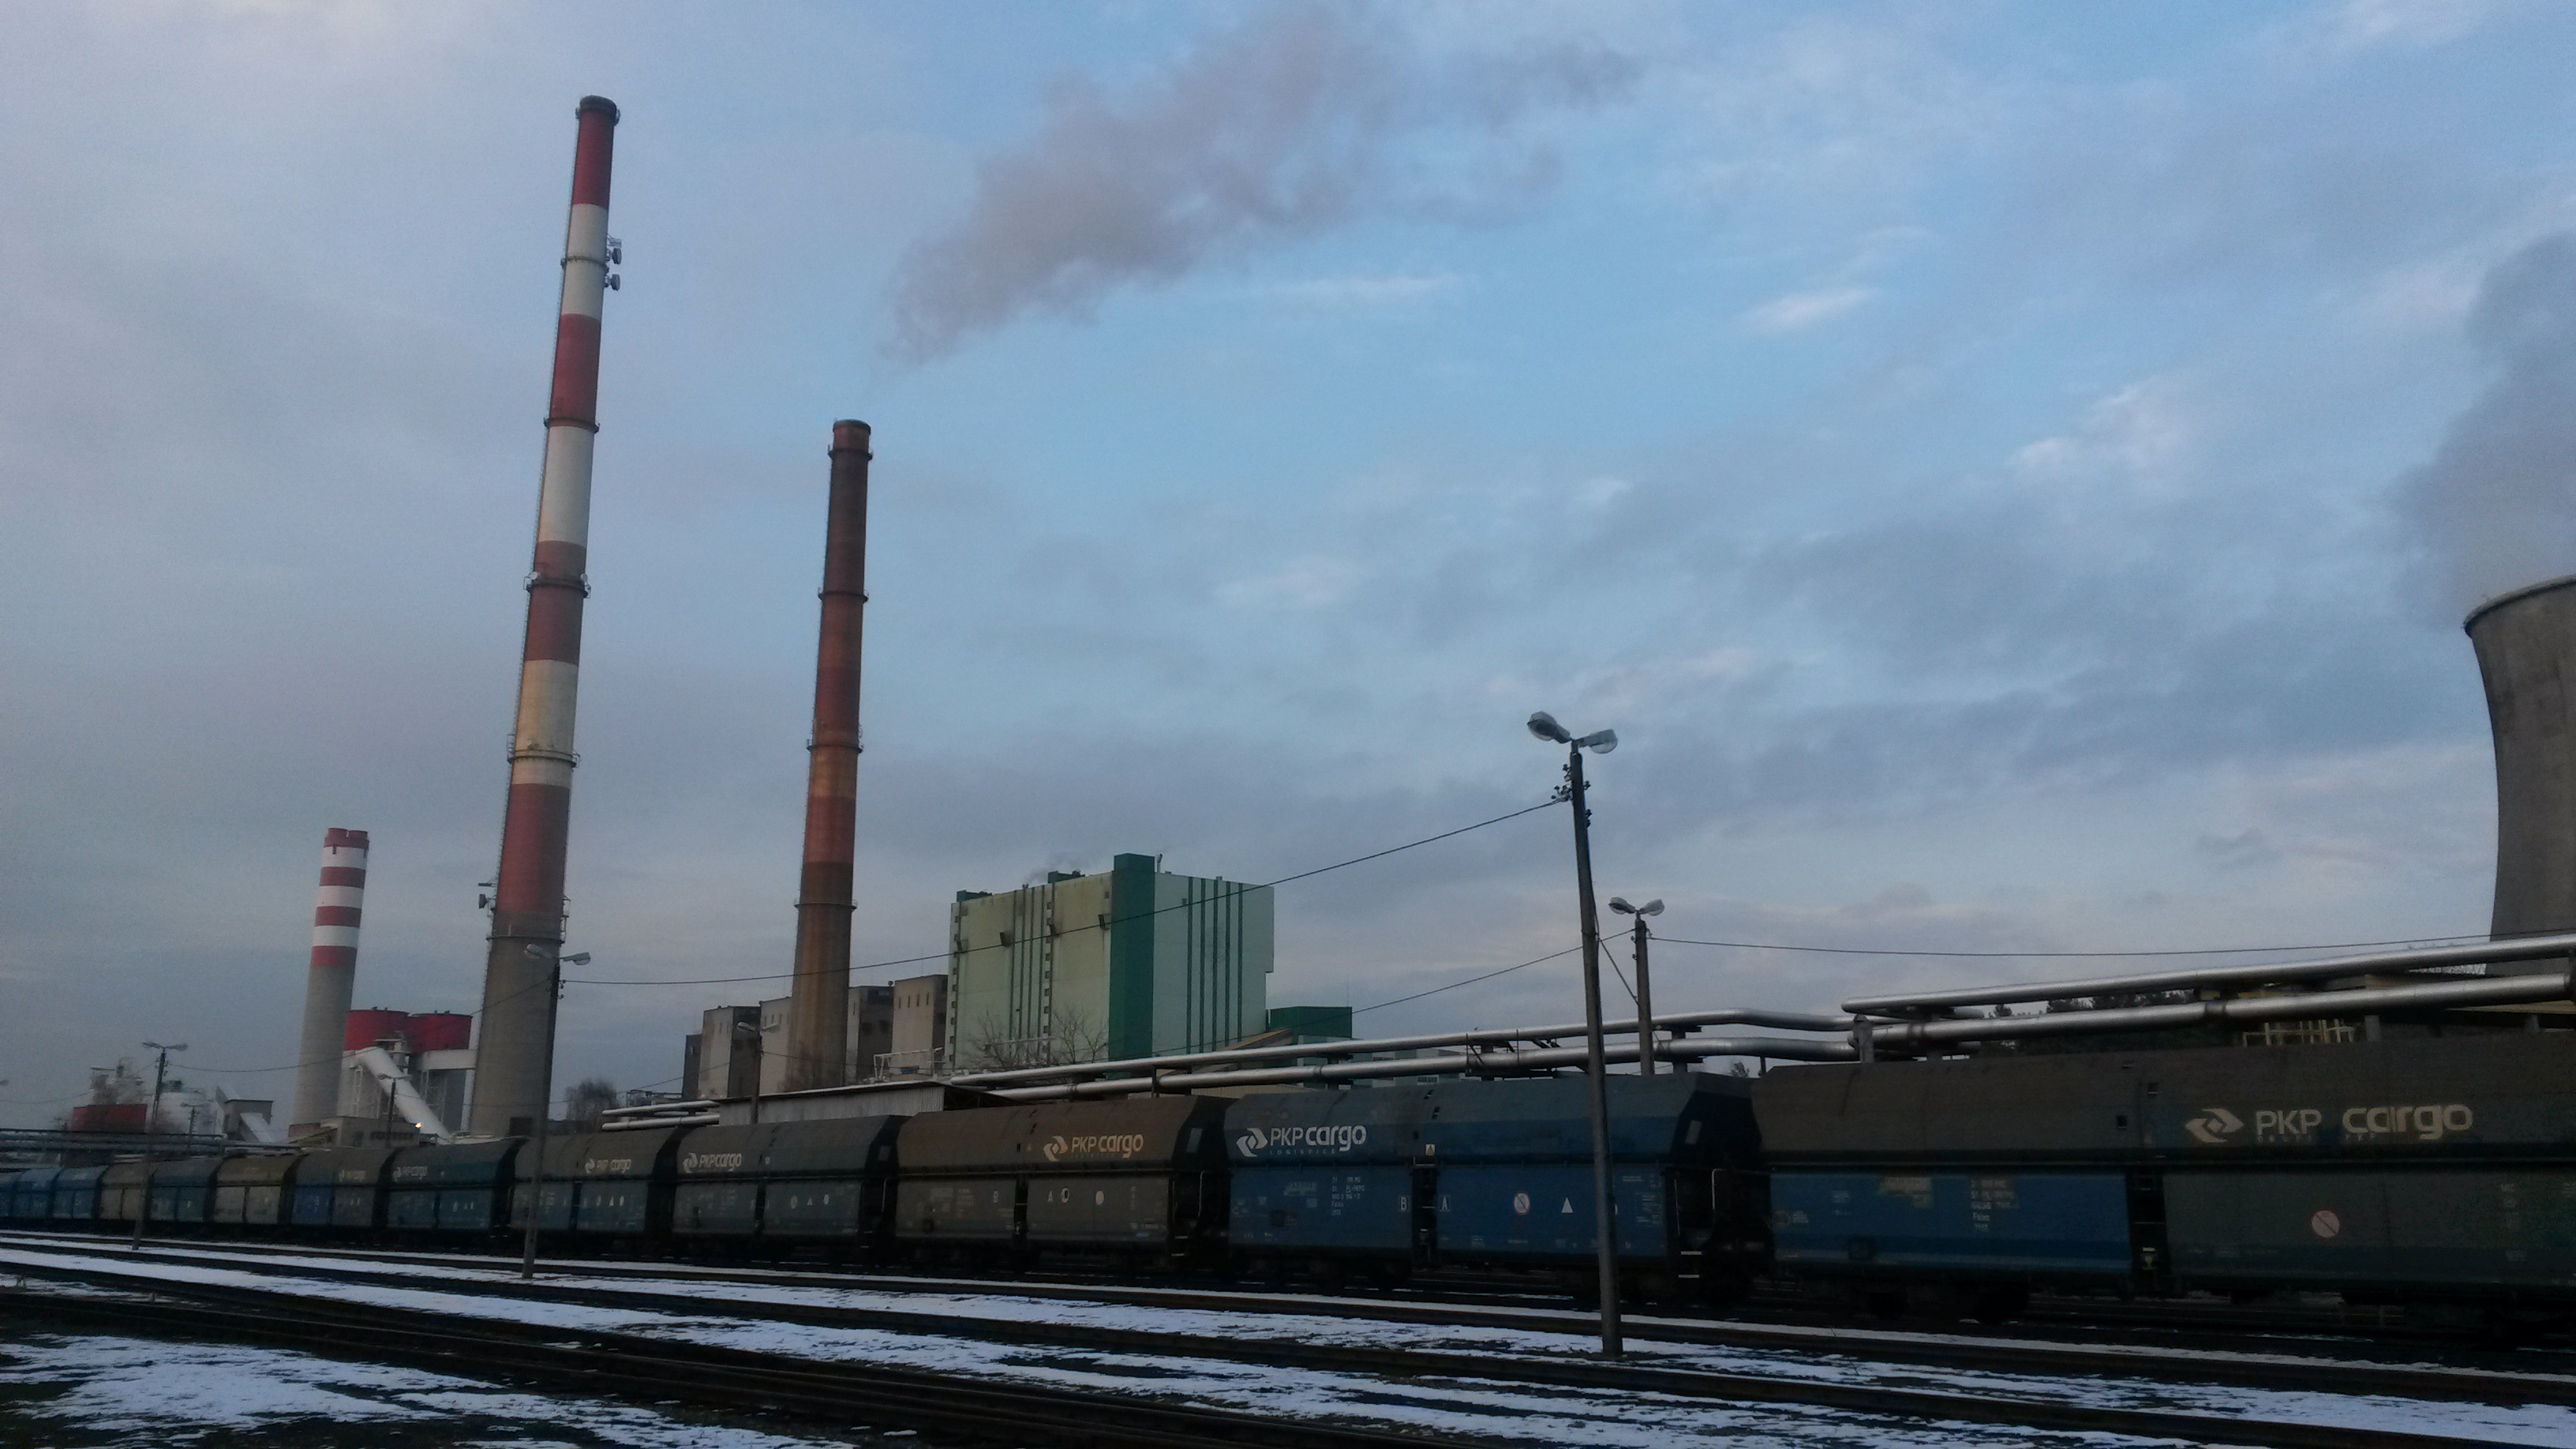 Poland gets almost 90 percent of its electricity from coal, but because Warsaw residents don’t burn the dirty fuel for heat, their air is much cleaner than Krakow’s. Image by Beth Gardiner. Poland, 2014.